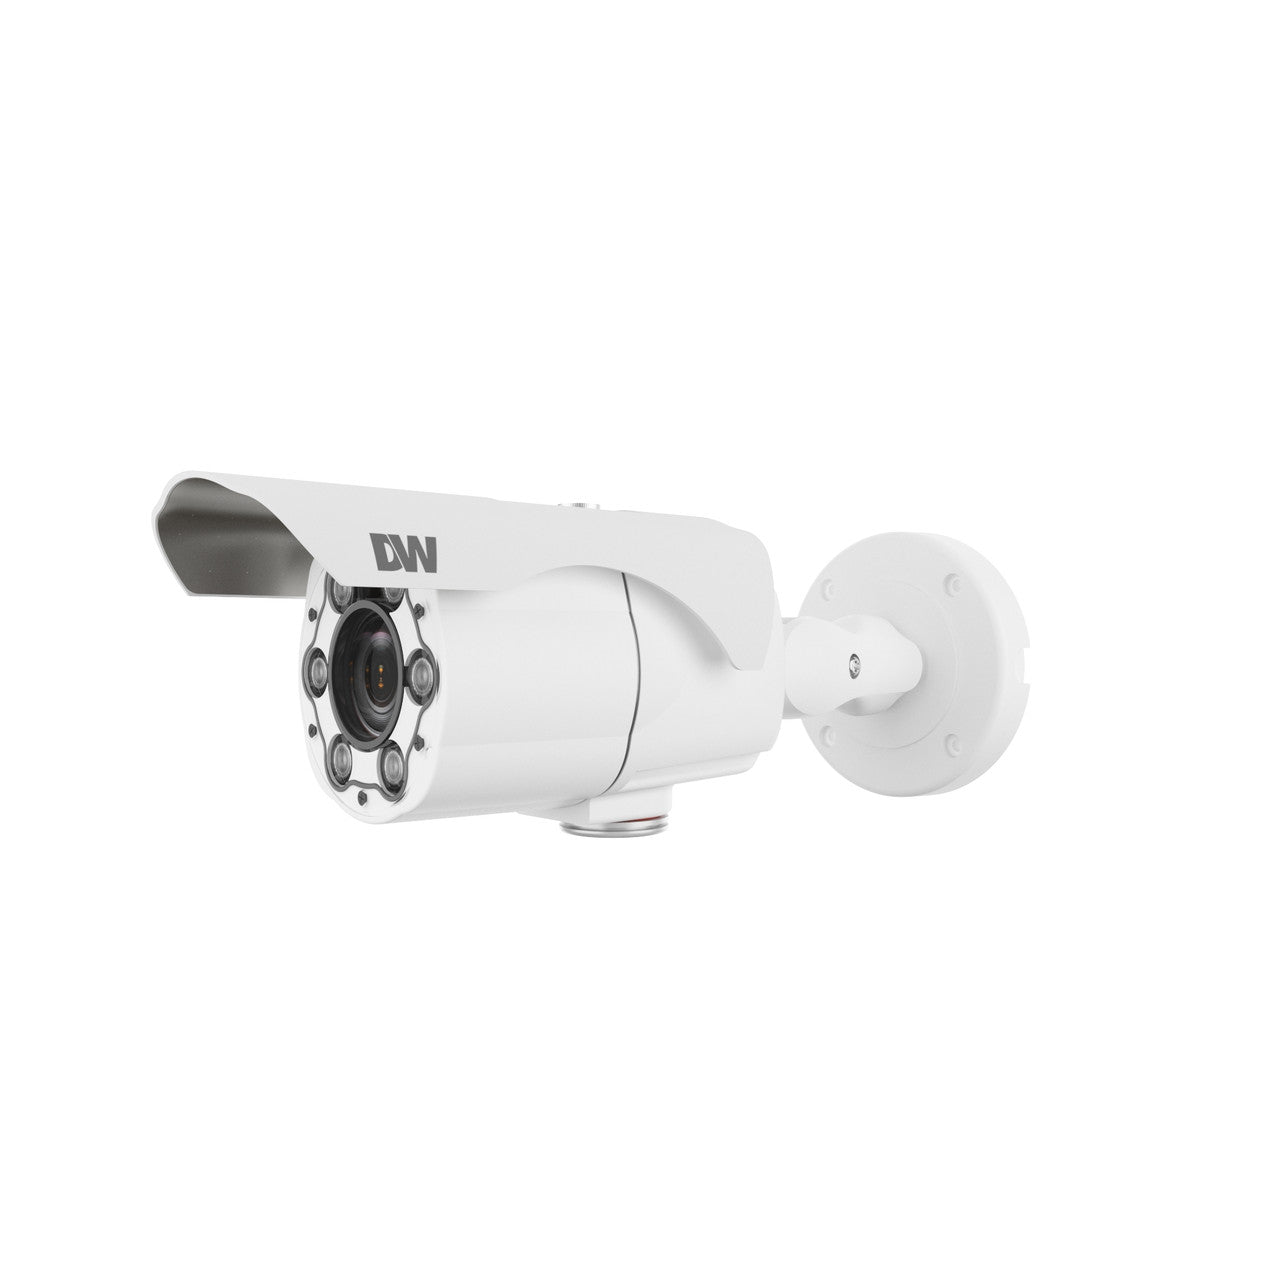 Digital Watchdog DWC-MB45iALPRTW 5MP Night Vision Outdoor Bullet IP Security Camera, License Plate Recognition LPR, 6~50mm Motorized Lens